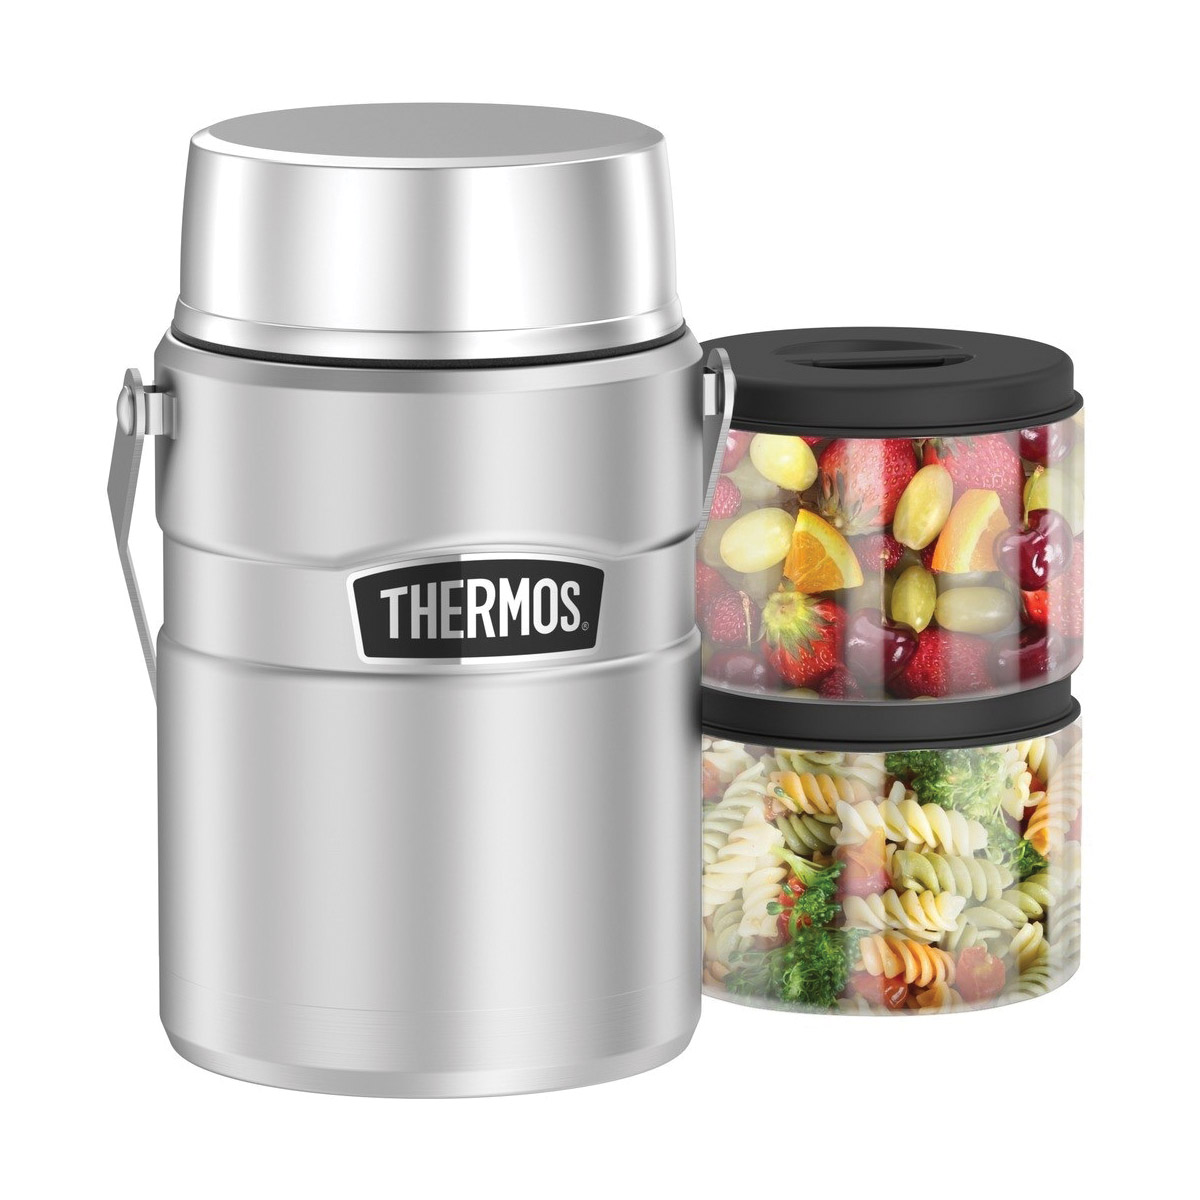 BIG BOSS STAINLESS KING SK3030MSTRI4 Vacuum Insulated Food Jar with Inner Container, 47 oz Capacity, 5.3 in L